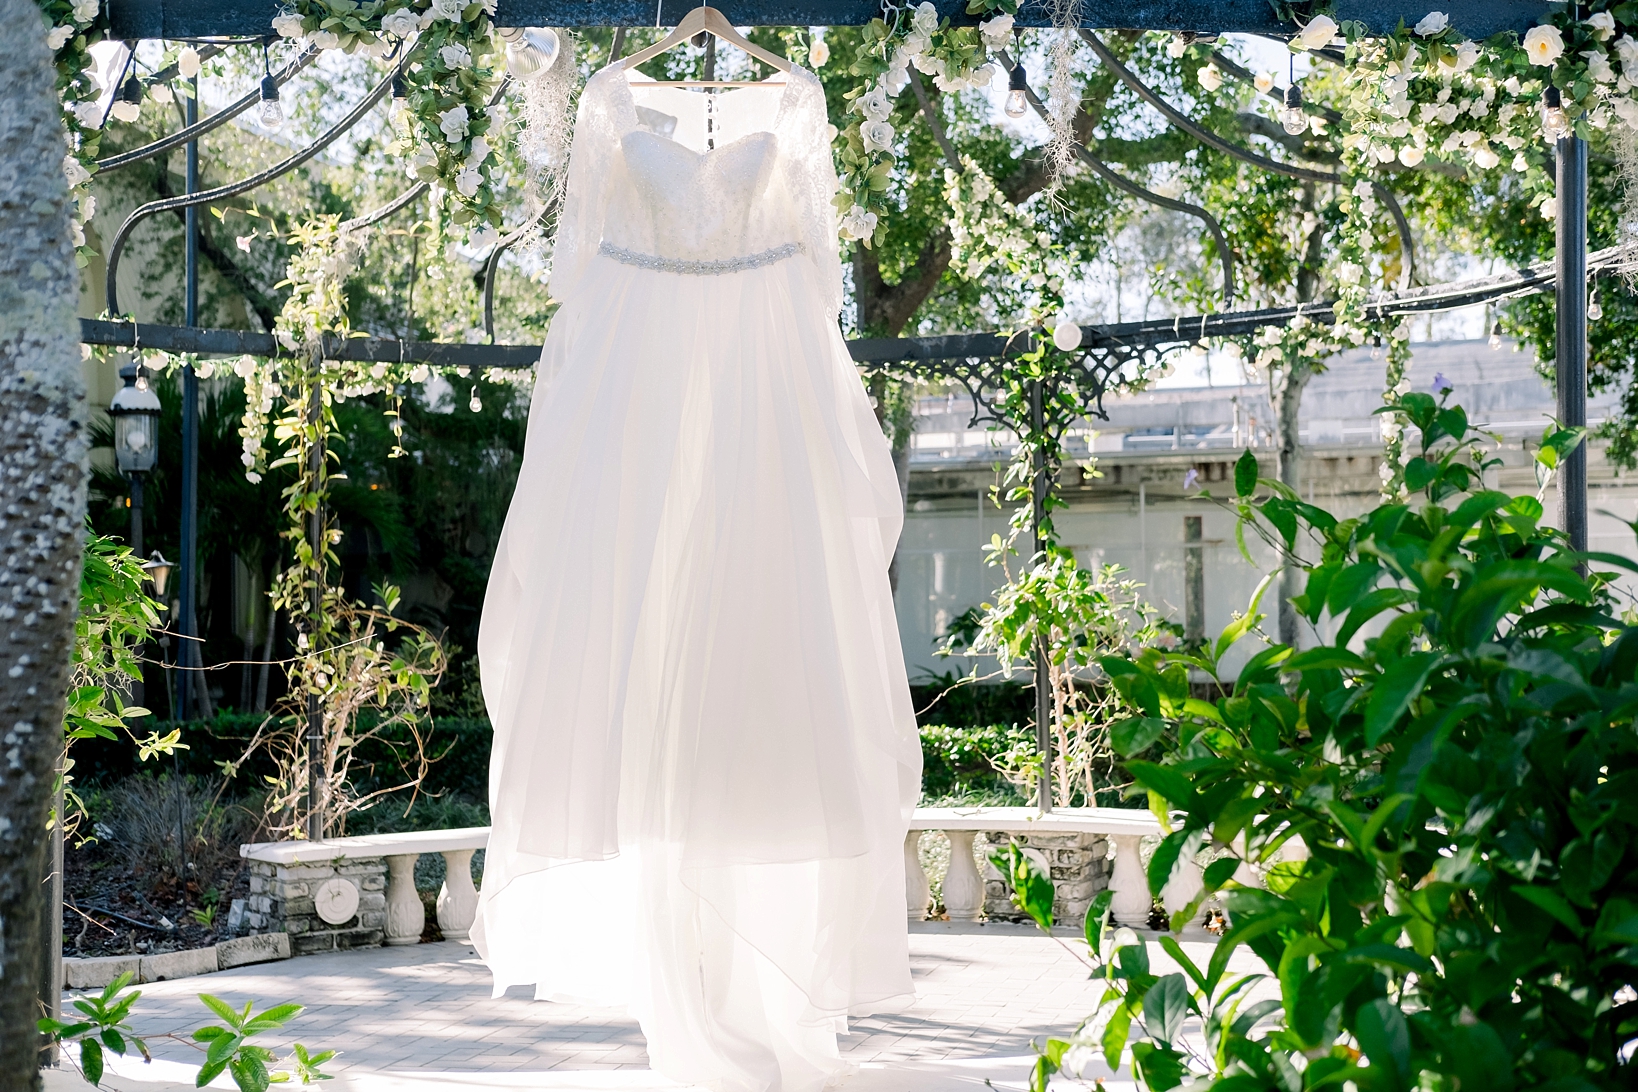 The bride's dress hanging against the greenery of the Kapok Tree by sarahben.com